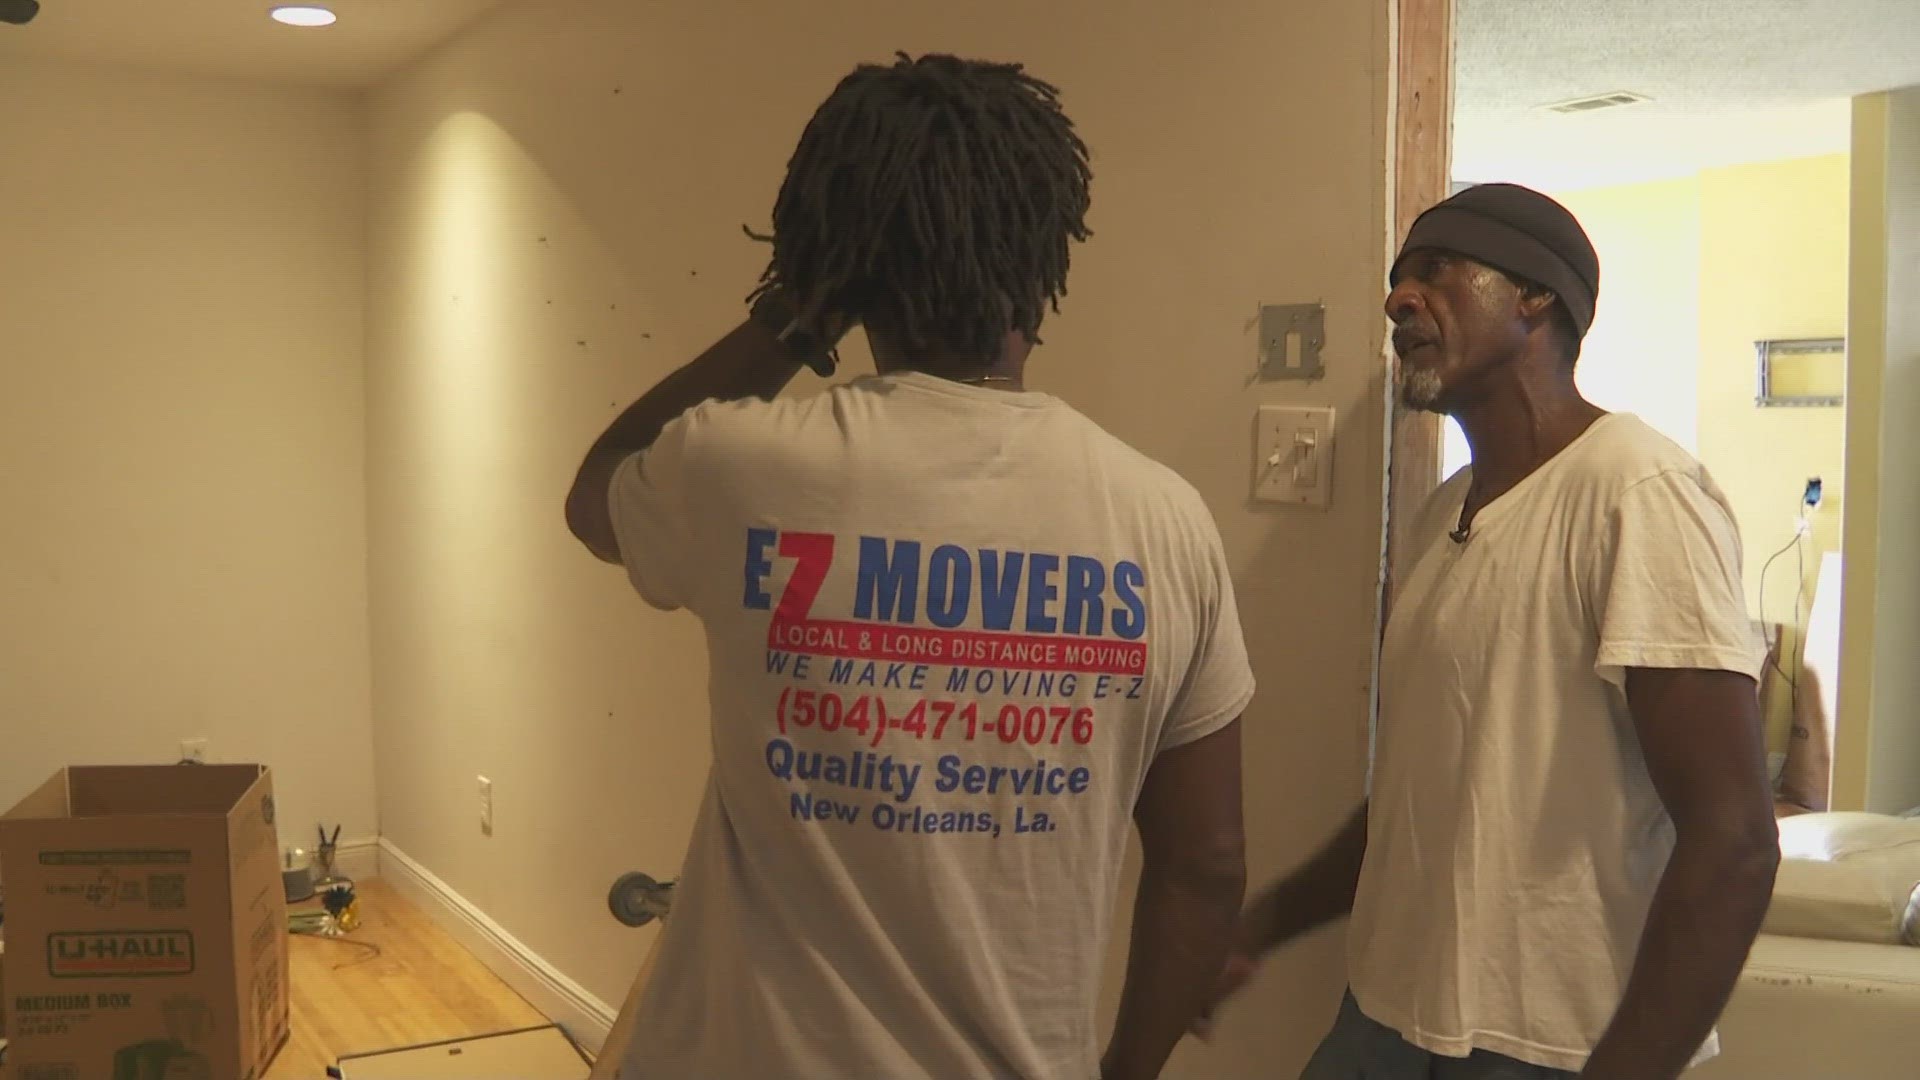 We drove to the 9th ward, where a resident who has been at the forefront of the fight finally got his moving day.